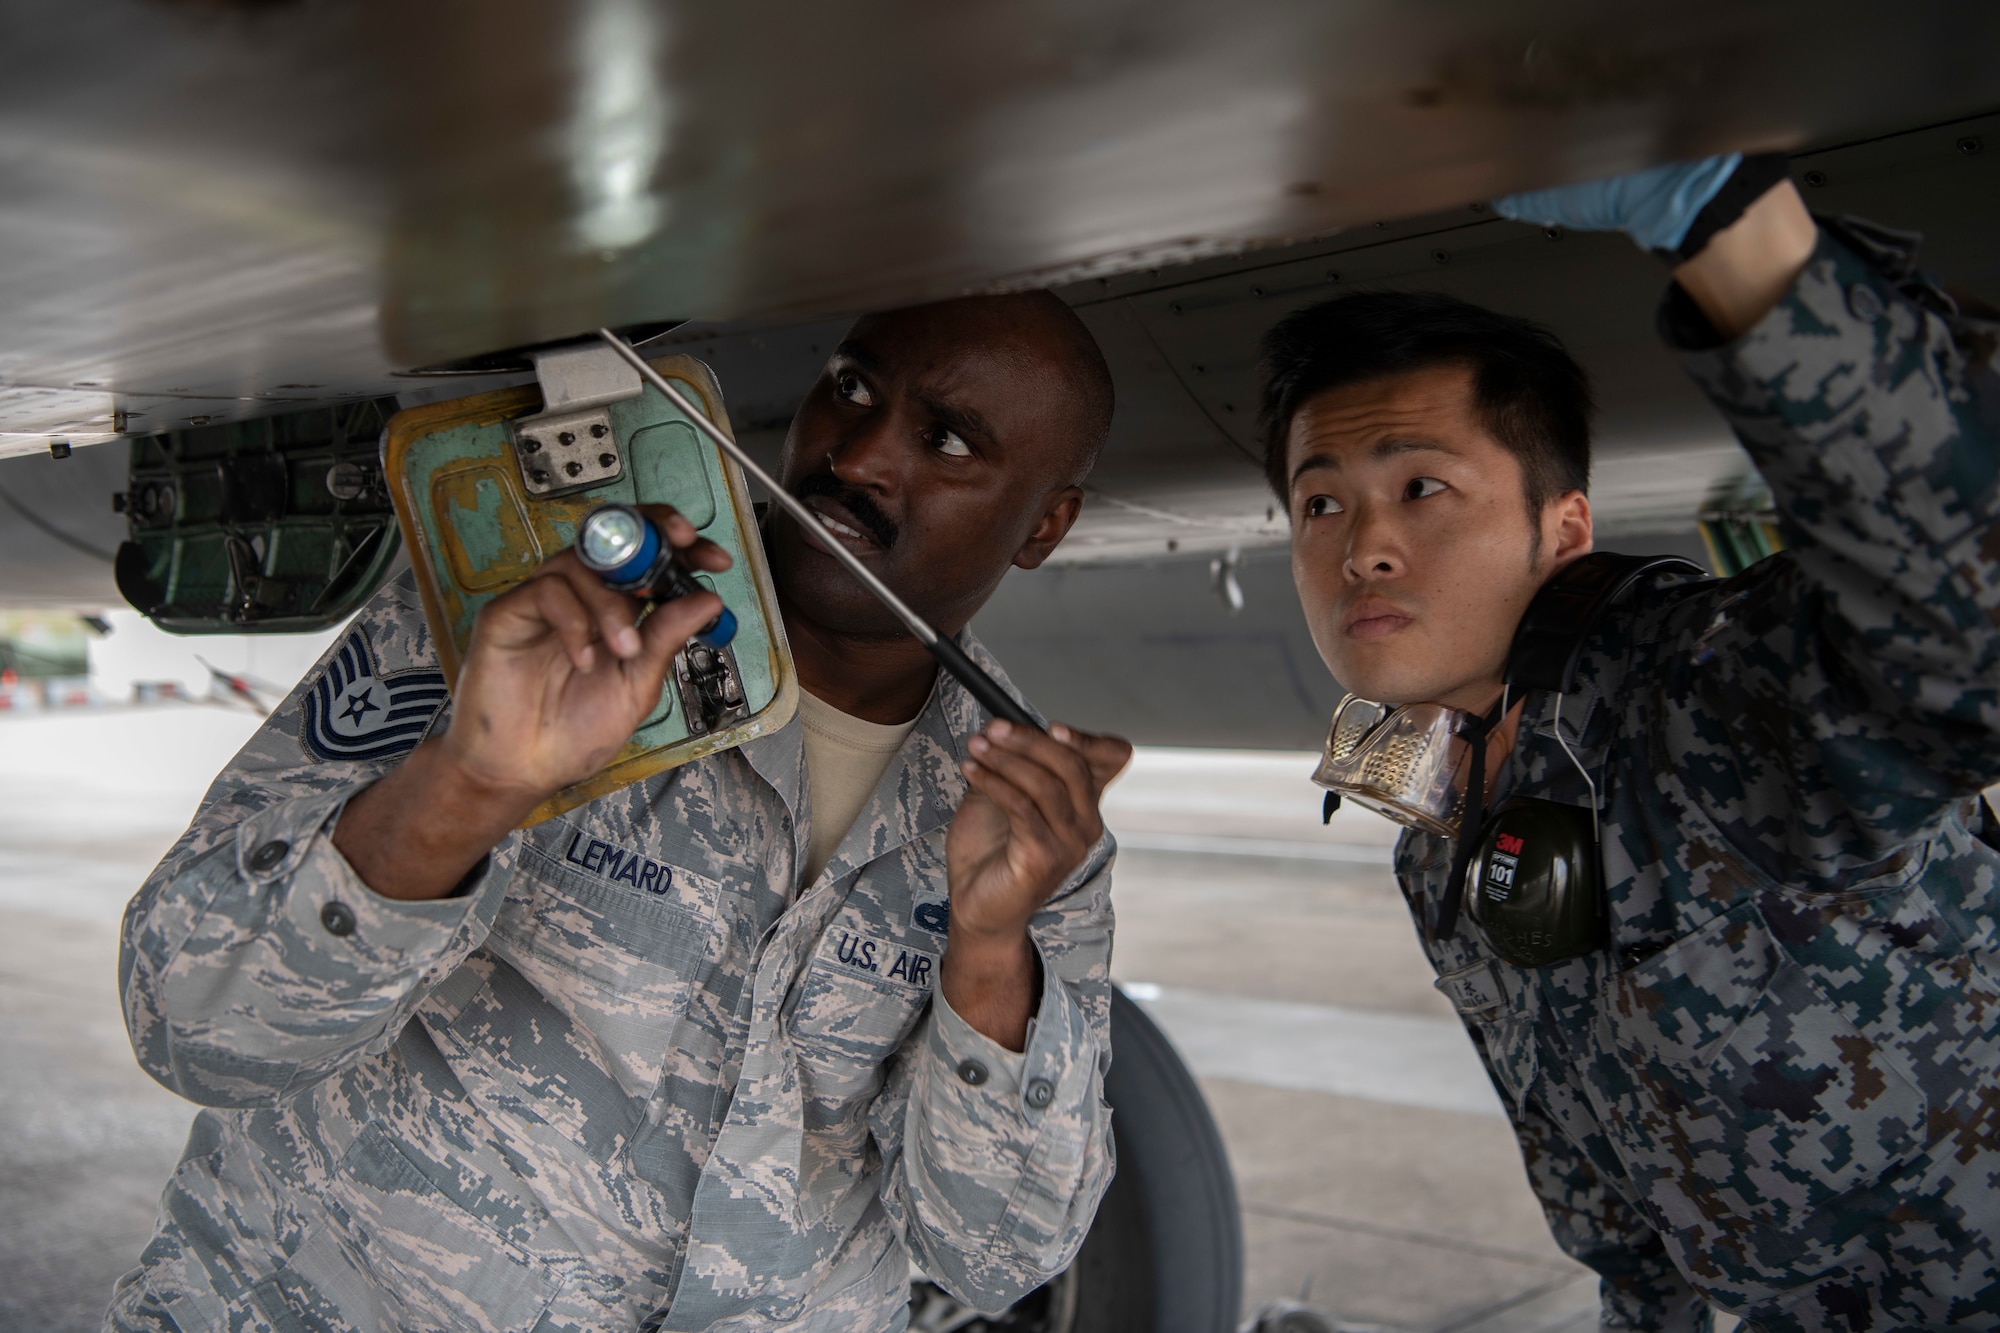 U.S. Air Force Tech. Sgt. Adrian Lemard, 18th Aircraft Maintenance Squadron crew chief, left, and  Japanese Self-Defense Force Staff Sgt. Shuichiro Masunaga, 6th Tactical Fighter Squadron aircraft general technician, right, perform thru-flight checks on an F-15C Eagle as part of an NCO Bilateral Exchange program Nov. 19, 2019, at Kadena Air Base, Japan. Bilateral exchanges allow for a better understanding of the capabilities held by each countries Armed Forces, as well as the opportunity to improve relations between the United States and Japan. (U.S. Air Force photo by Senior Airman Rhett Isbell)